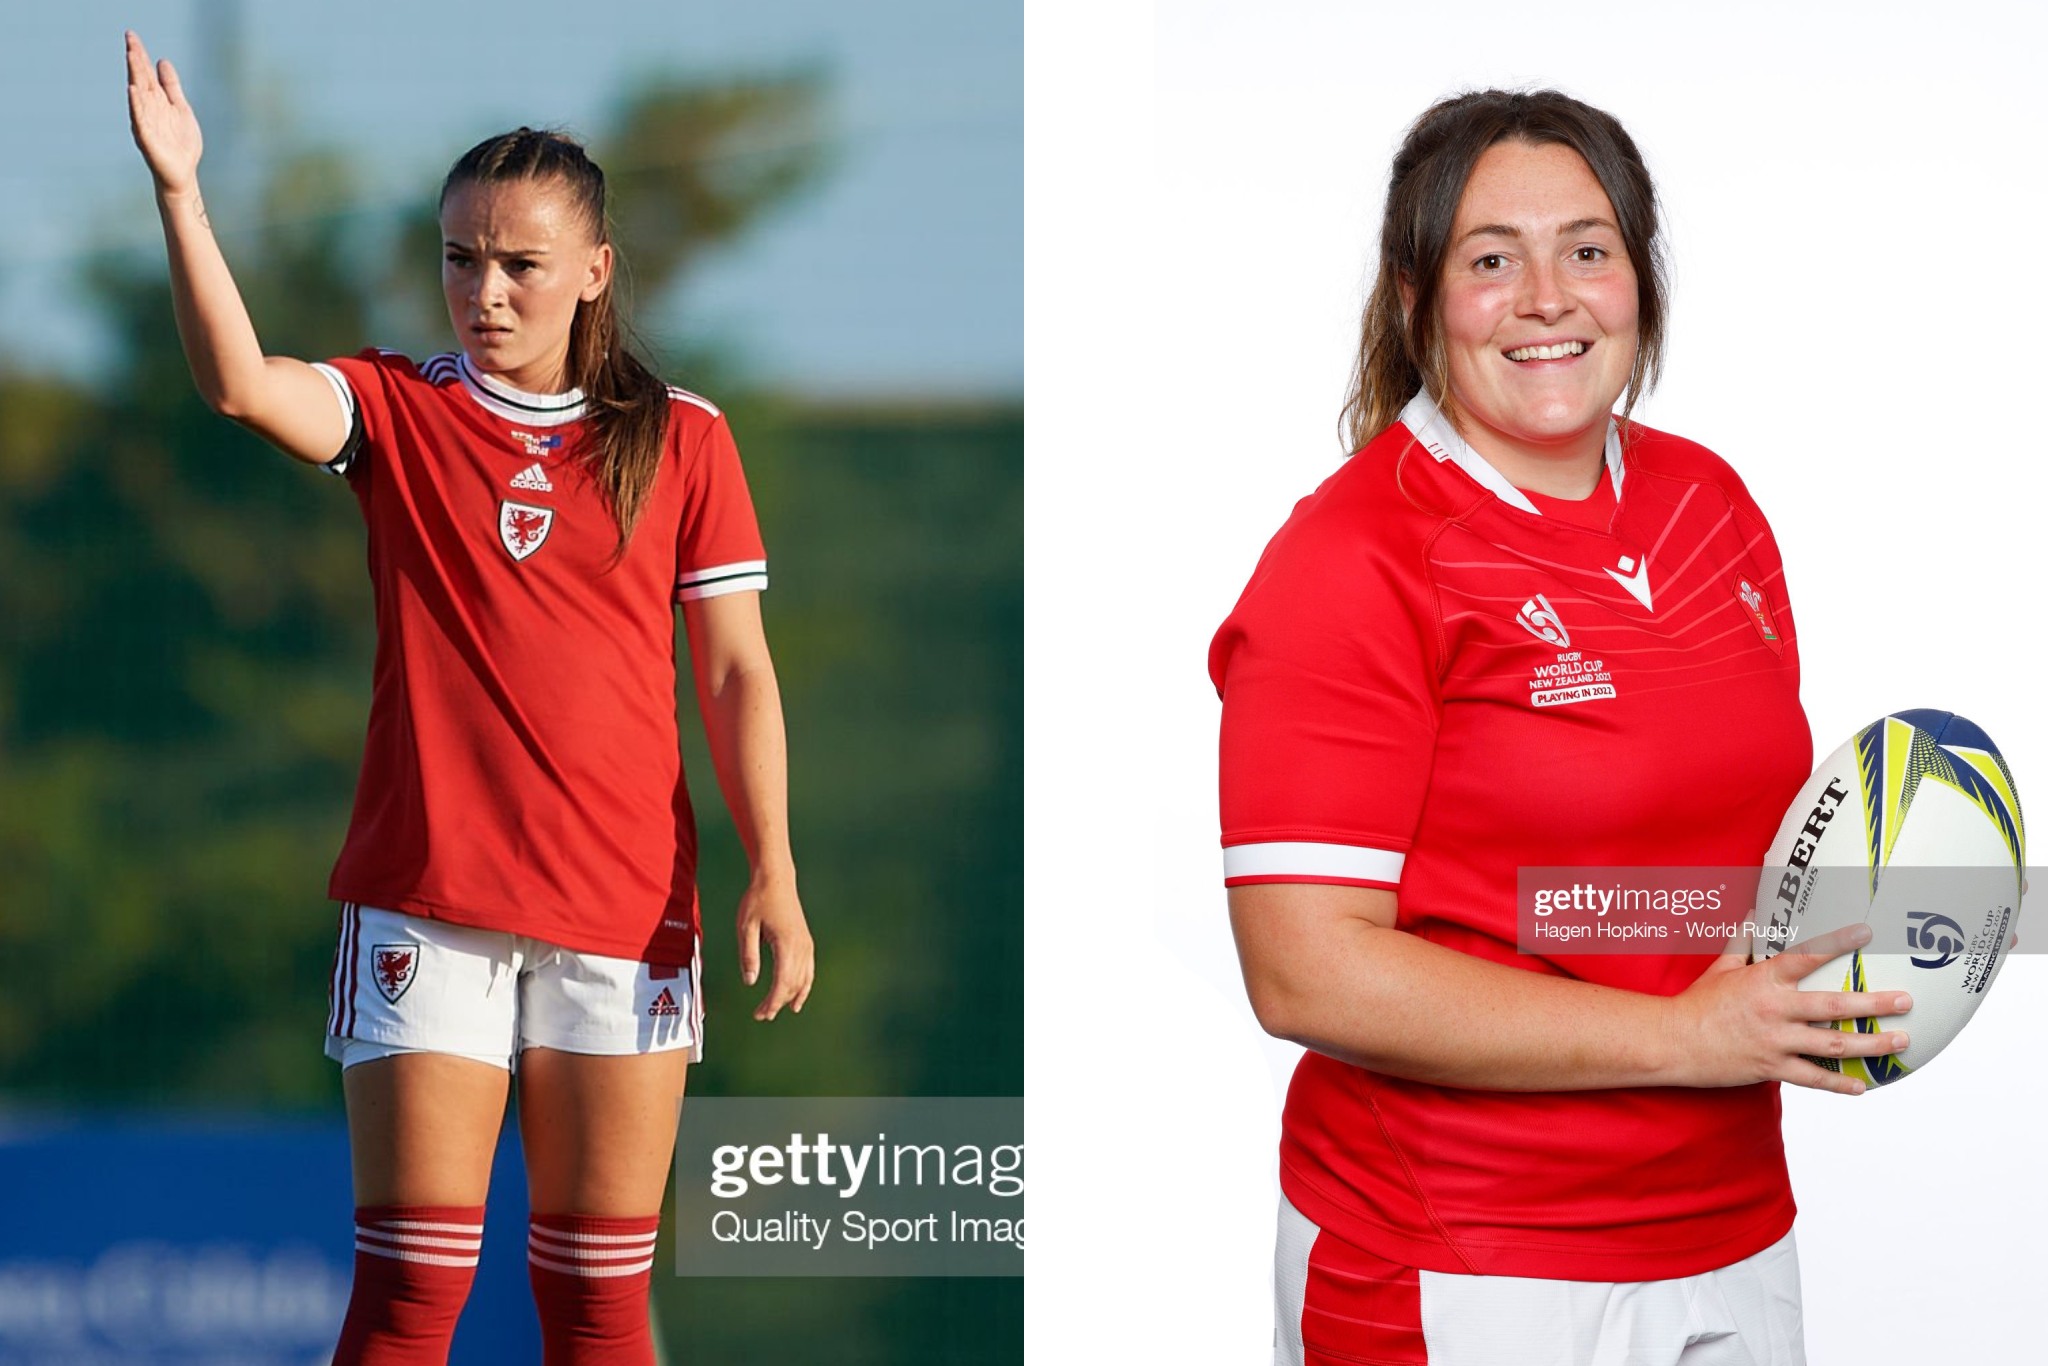 Lily Woodham, New Zealand v Wales - International Friendly. Cerys Hale, Wales Portraits - 2021 Rugby World Cup